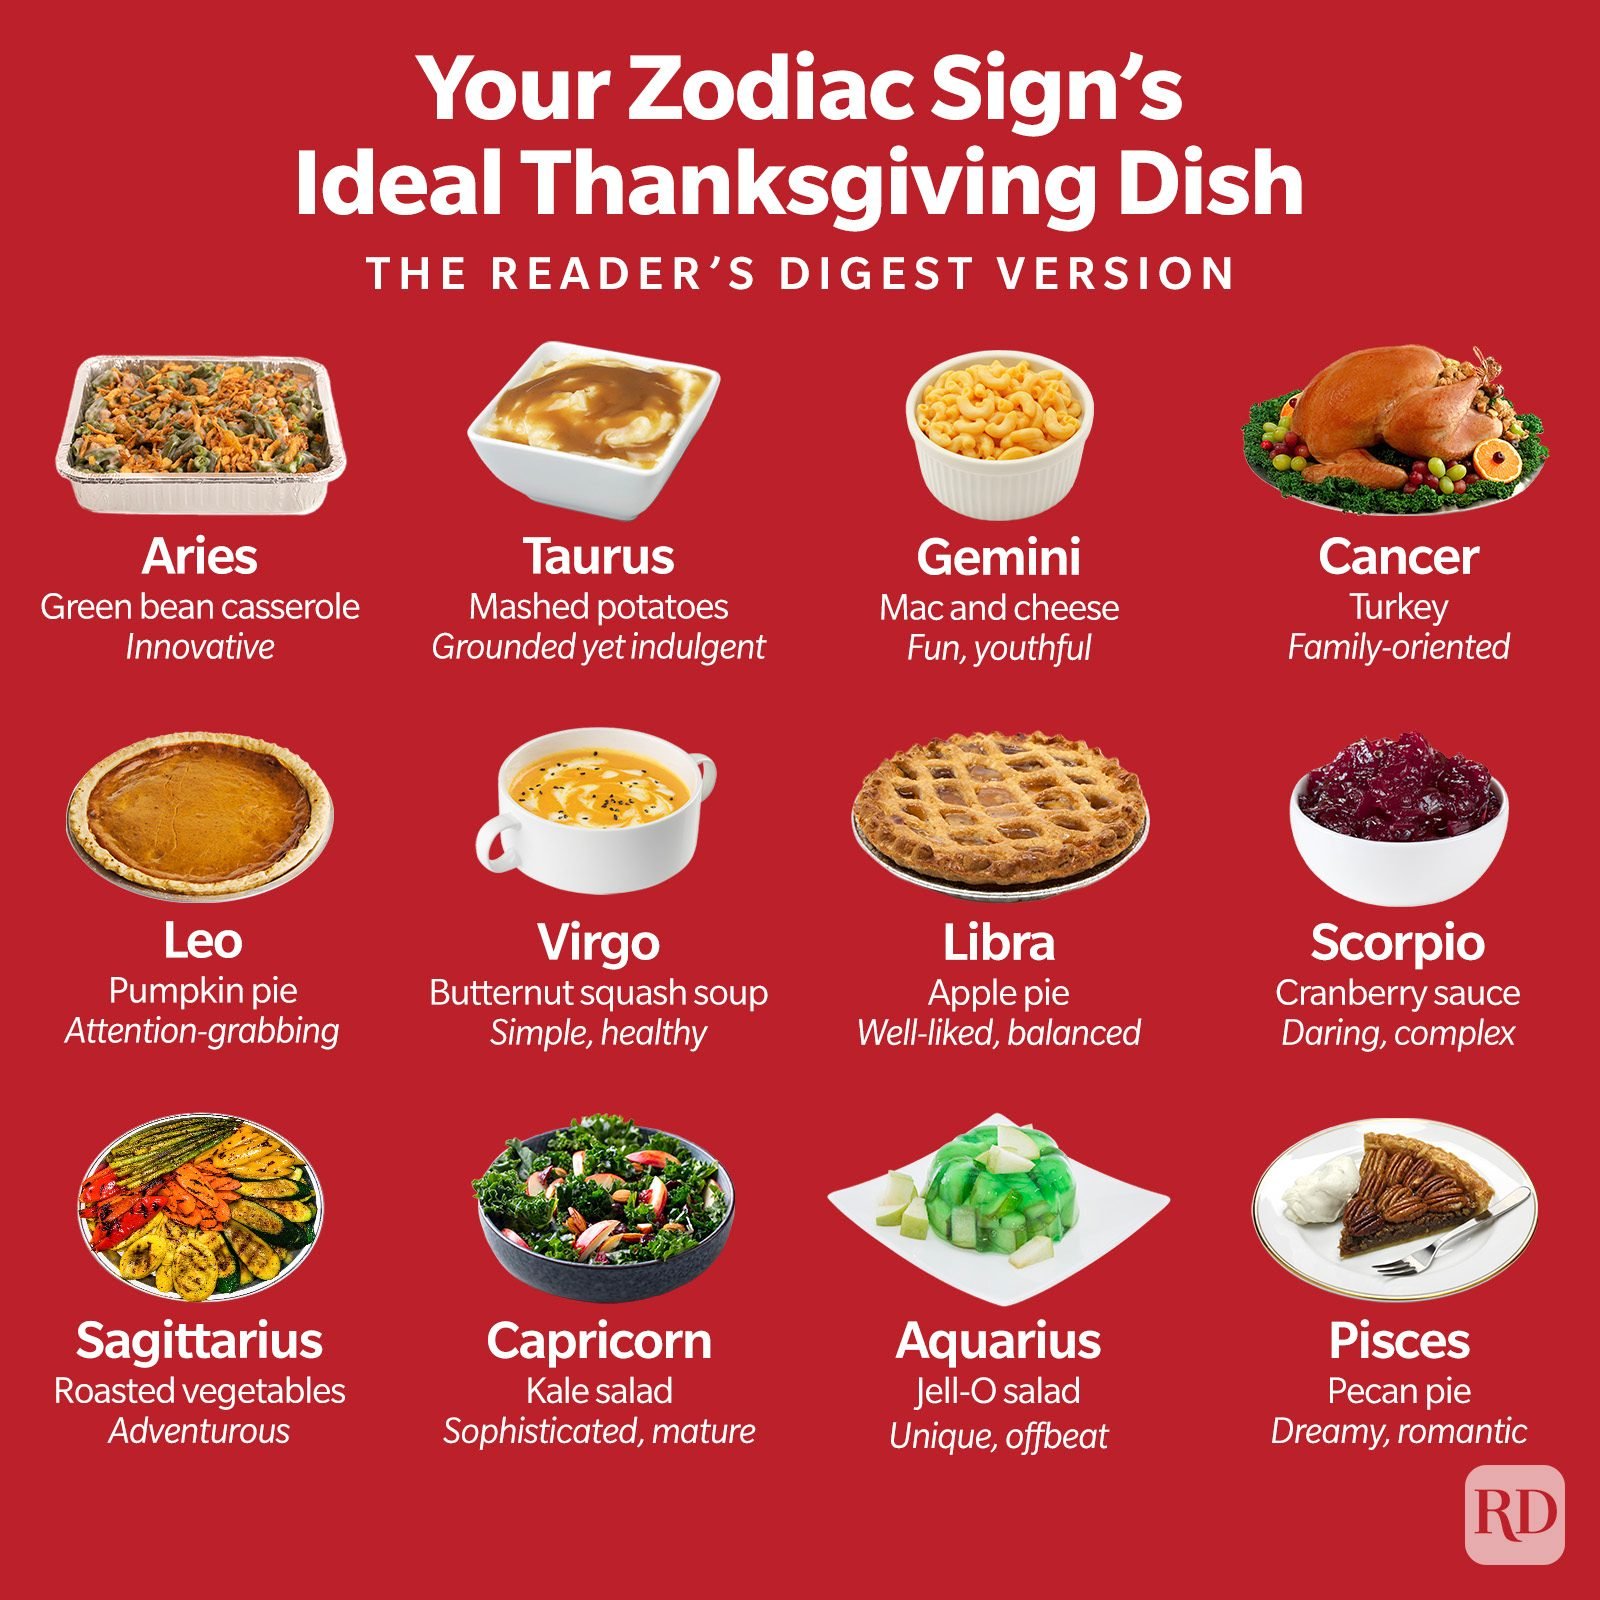 https://www.rd.com/wp-content/uploads/2021/11/Your-Zodiac-Signs-Ideal-Thanksgiving-Dish-v2-Graphic-GettyImages12.jpg